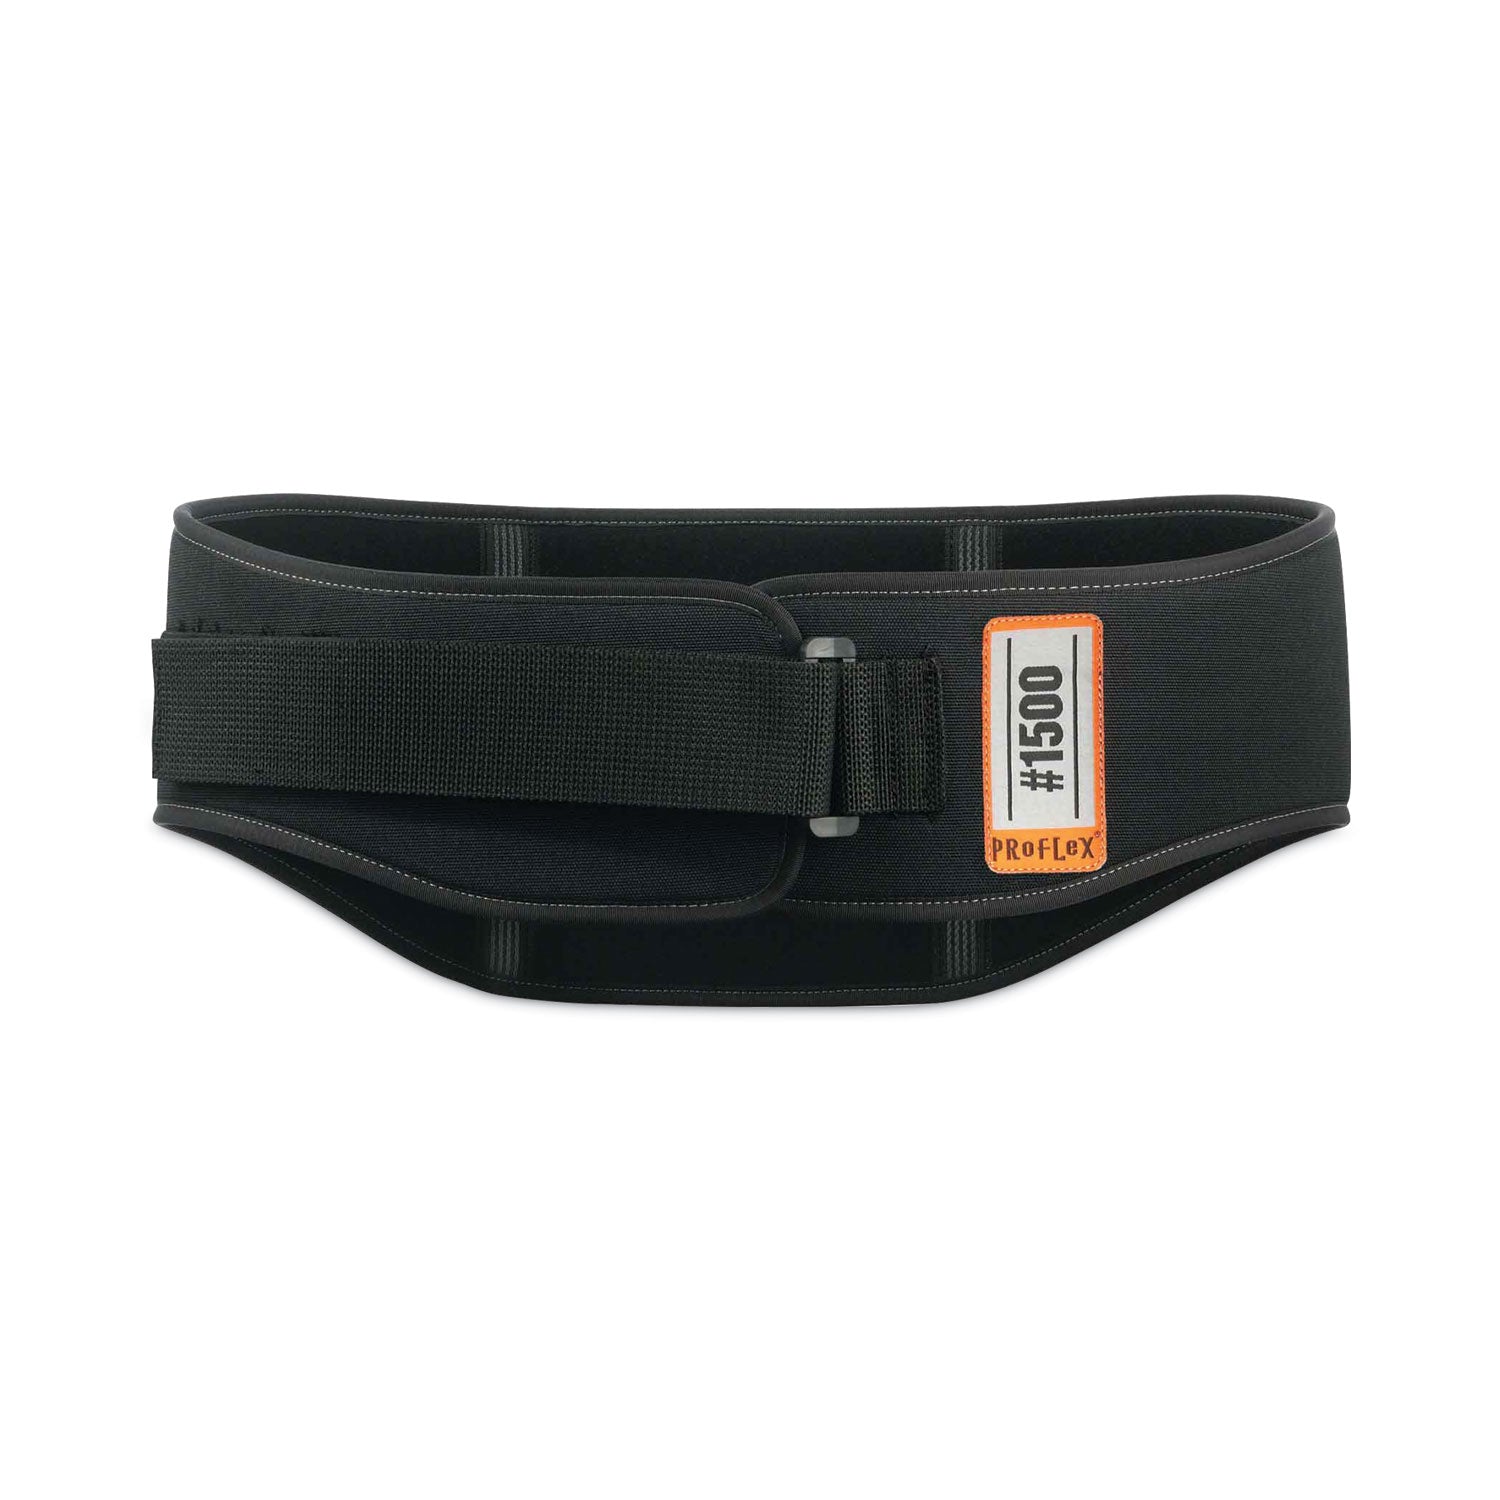 proflex-1500-weight-lifters-style-back-support-belt-large-34-to-38-waist-black-ships-in-1-3-business-days_ego11473 - 1